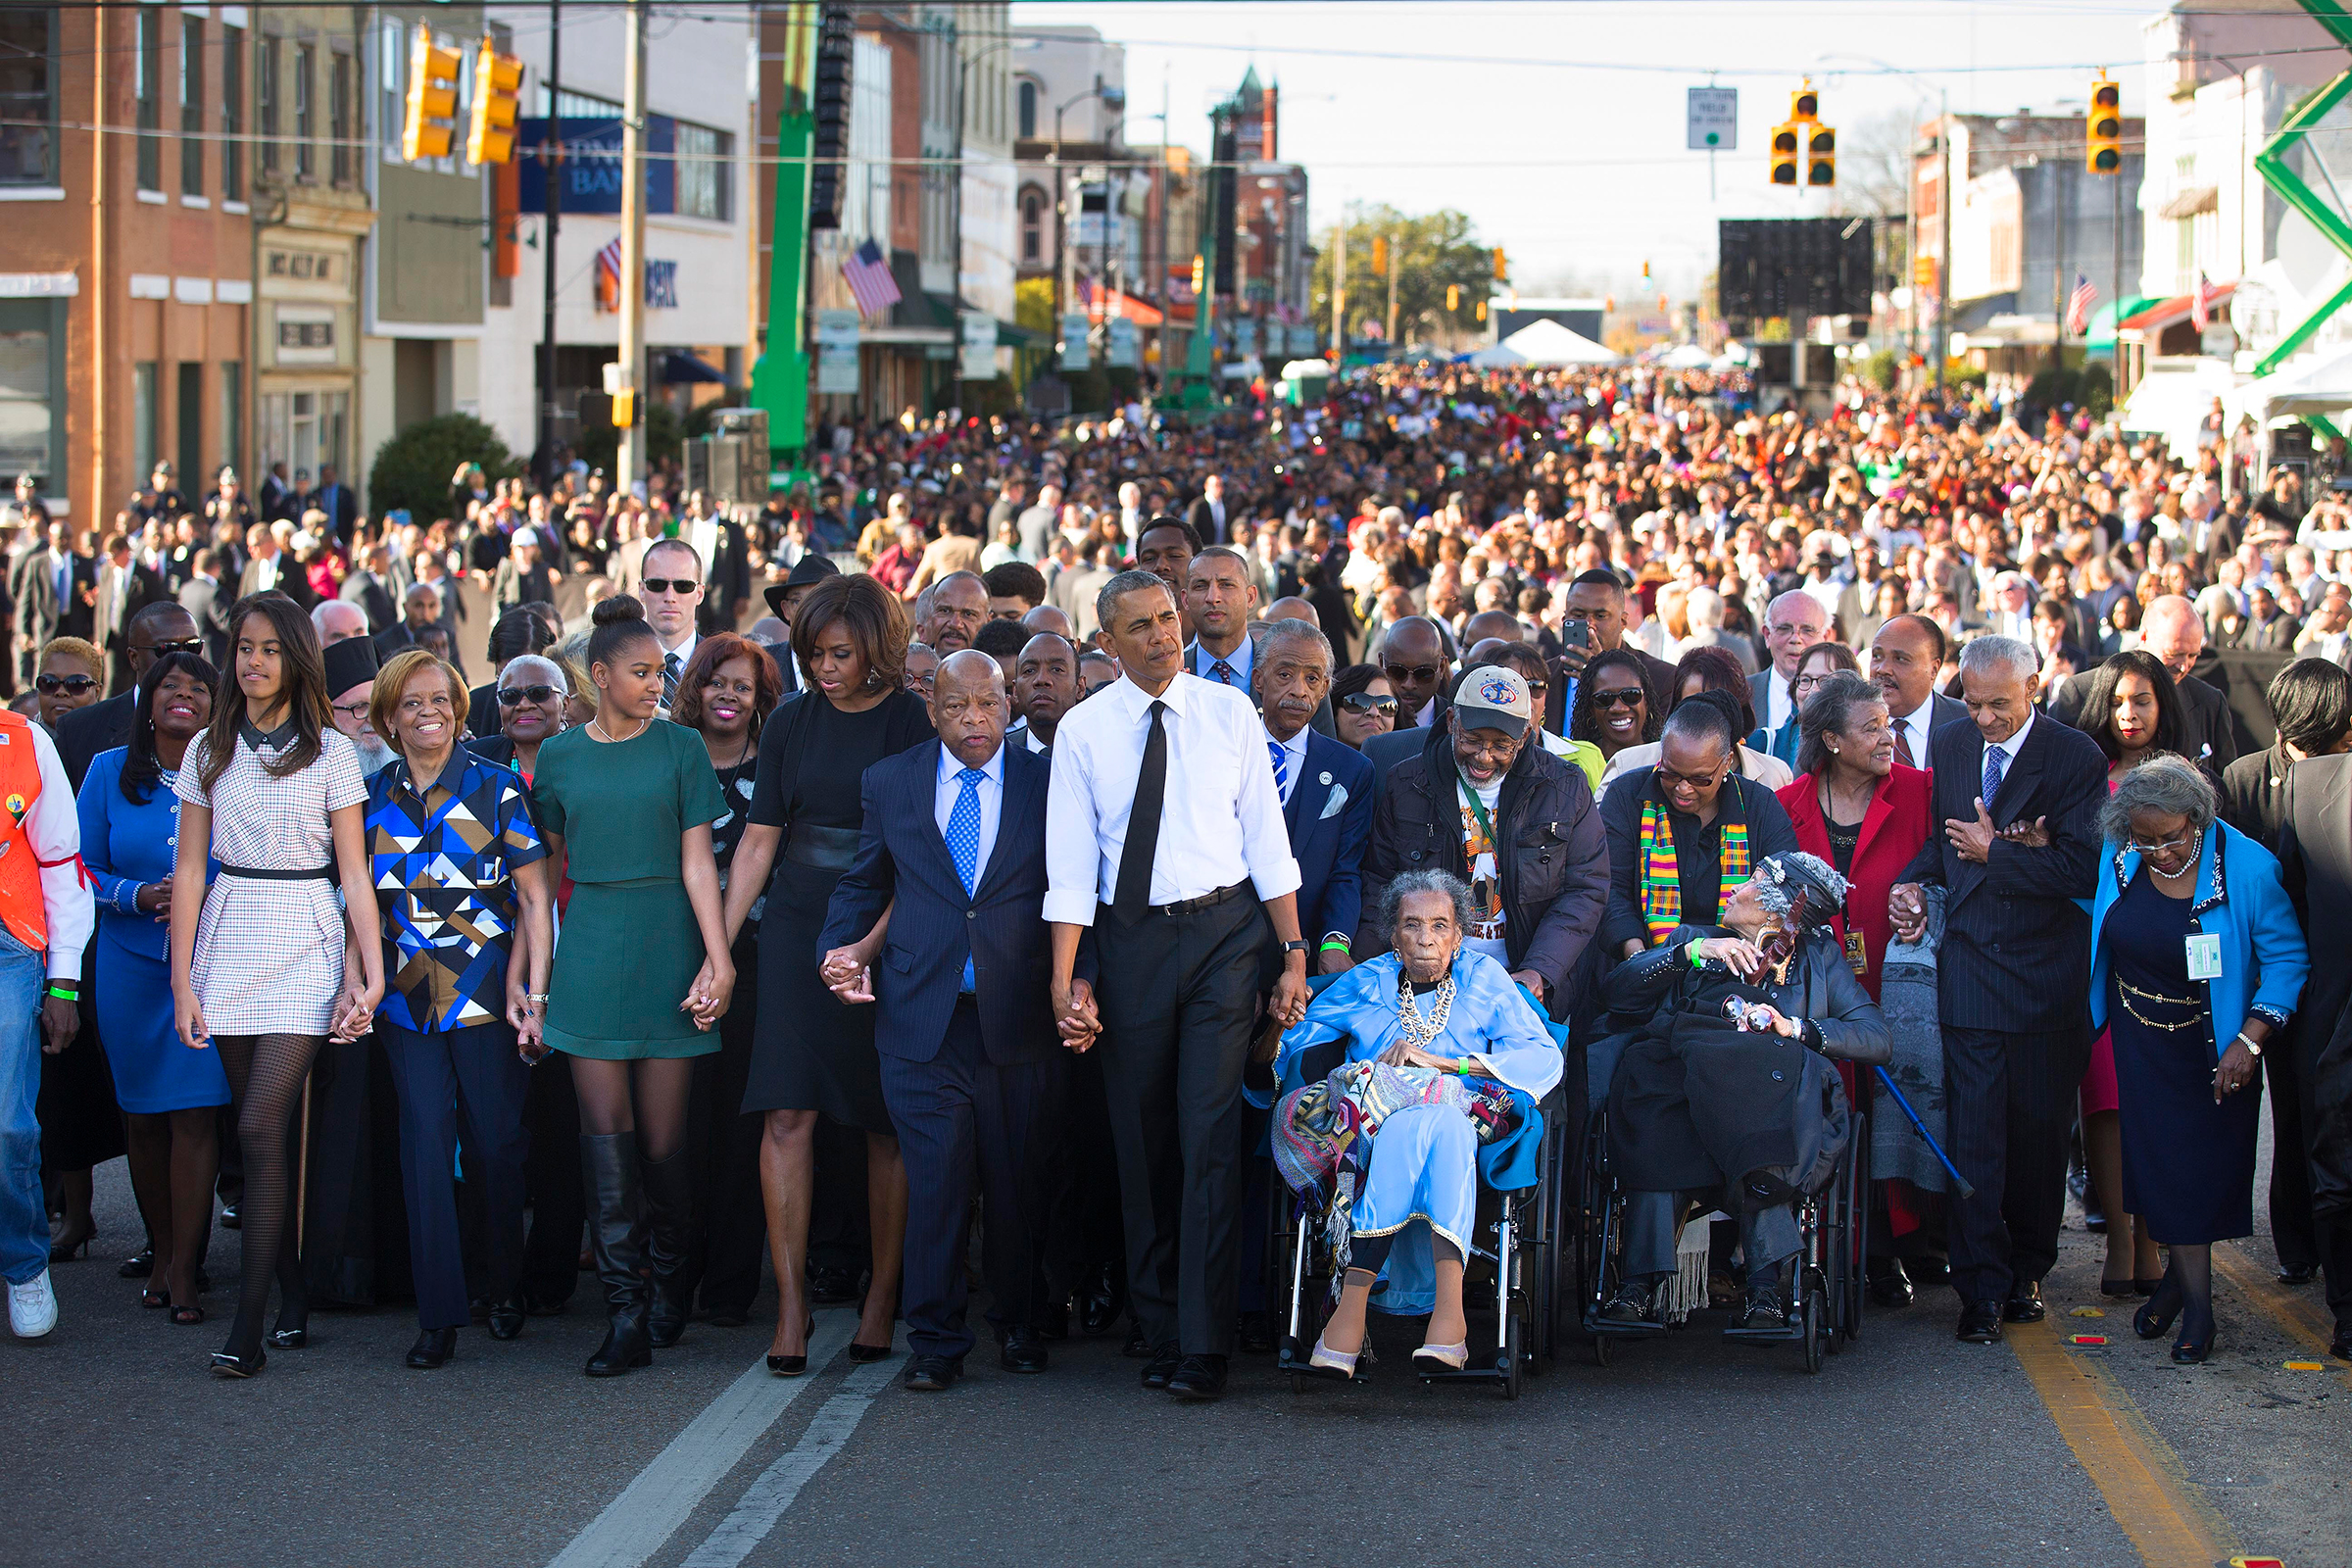 Barack Obama, Amelia Boynton, right, Rep. John Lewis and the President's family lead a march toward the Edmund Pettus Bridge in Selma, Ala., on March 7, 2015, 50 years after "Bloody Sunday." (Doug Mills—The New York Times/Redux)